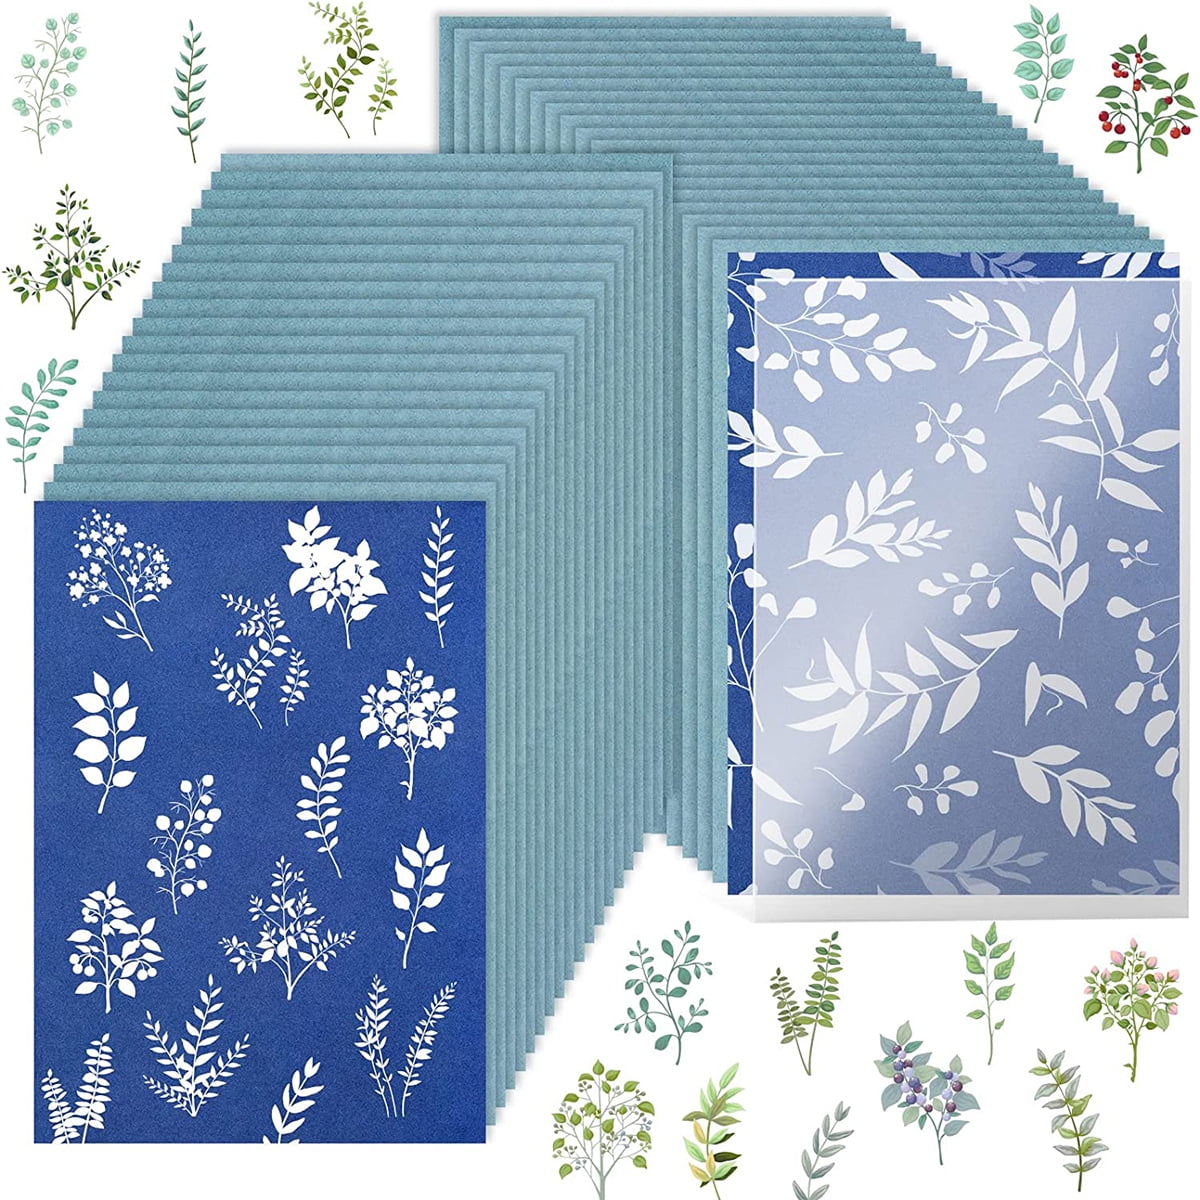 SUNCREATIONS Cyanotype Kit, 2 Component Sensitizer Set with 28-sheets 5.7''x8.2